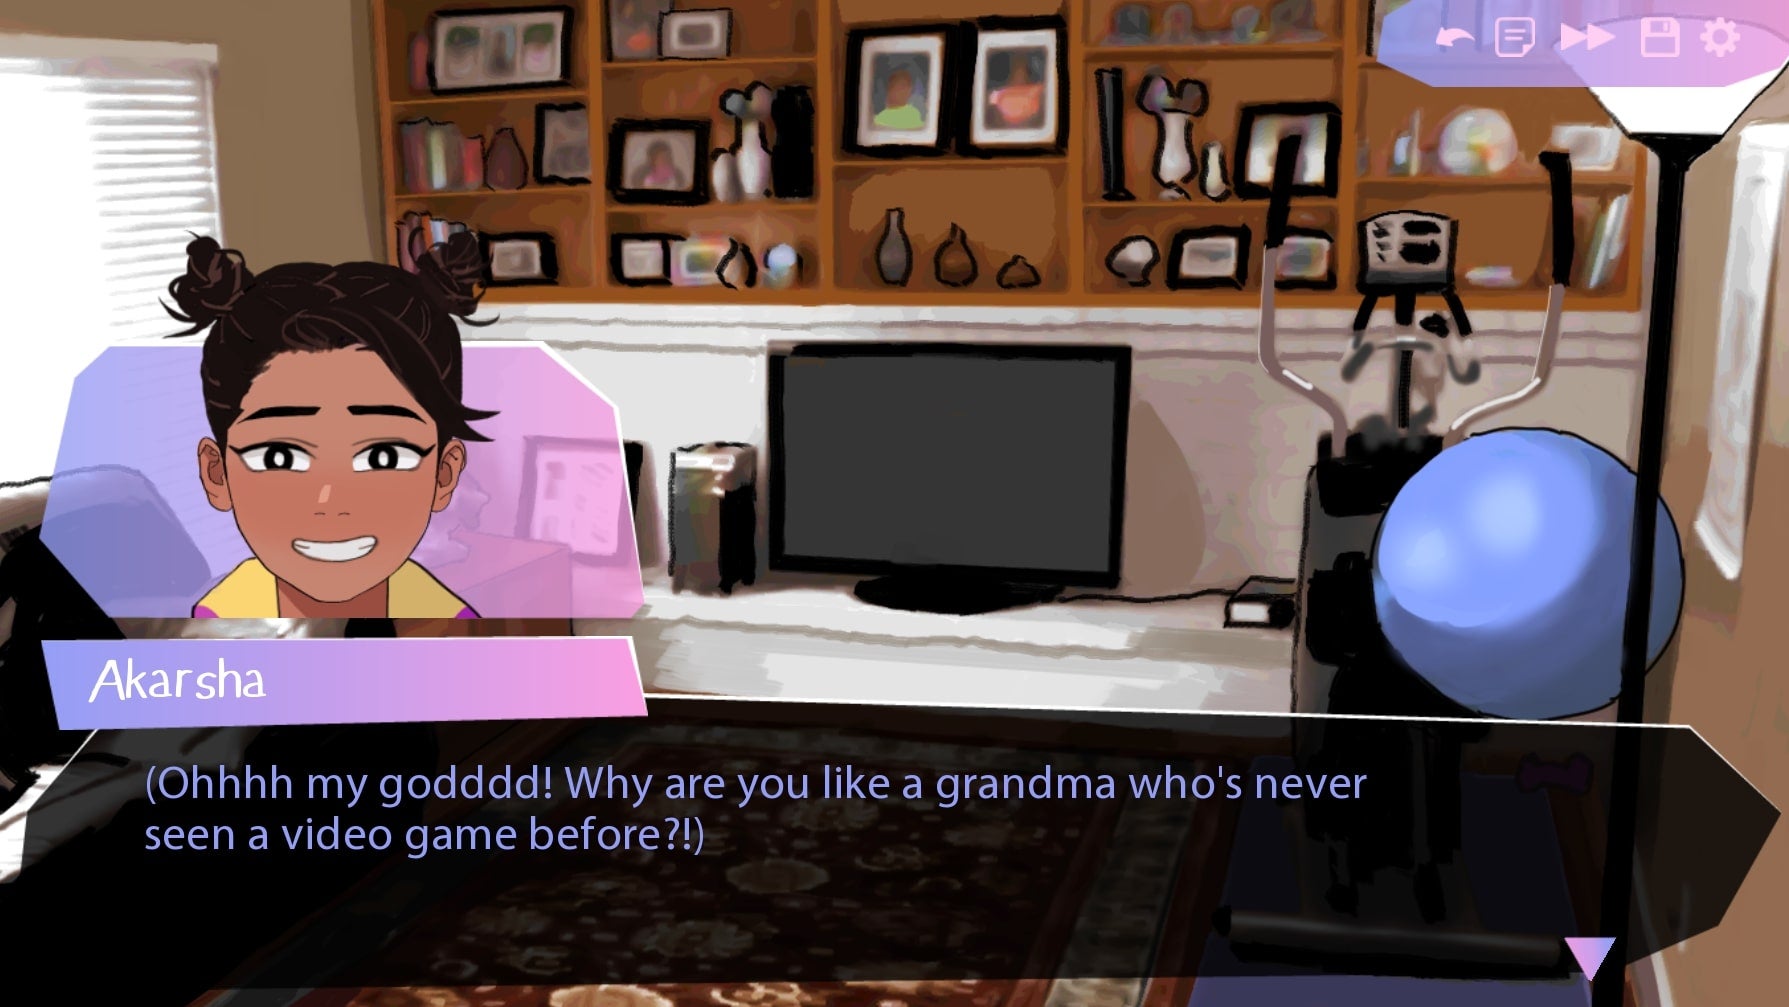 A Butterfly Soup 2 screenshot where character Akarsha is in a living room with the text: Oh my god! Why are you like a grandma who's never seen a video game before?!